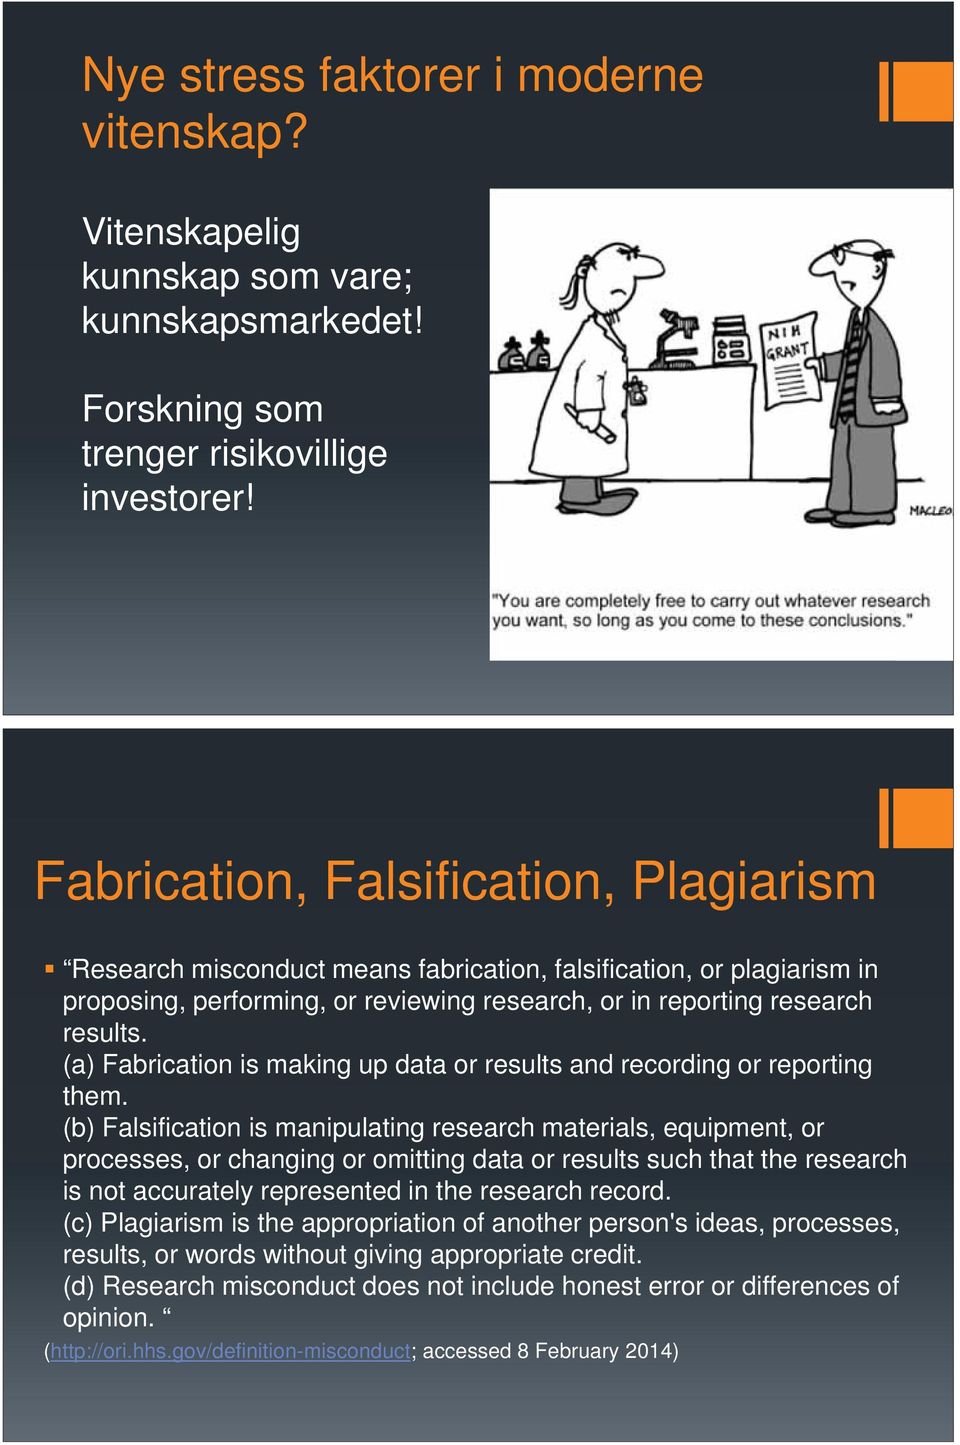 (a) Fabrication is making up data or results and recording or reporting them.